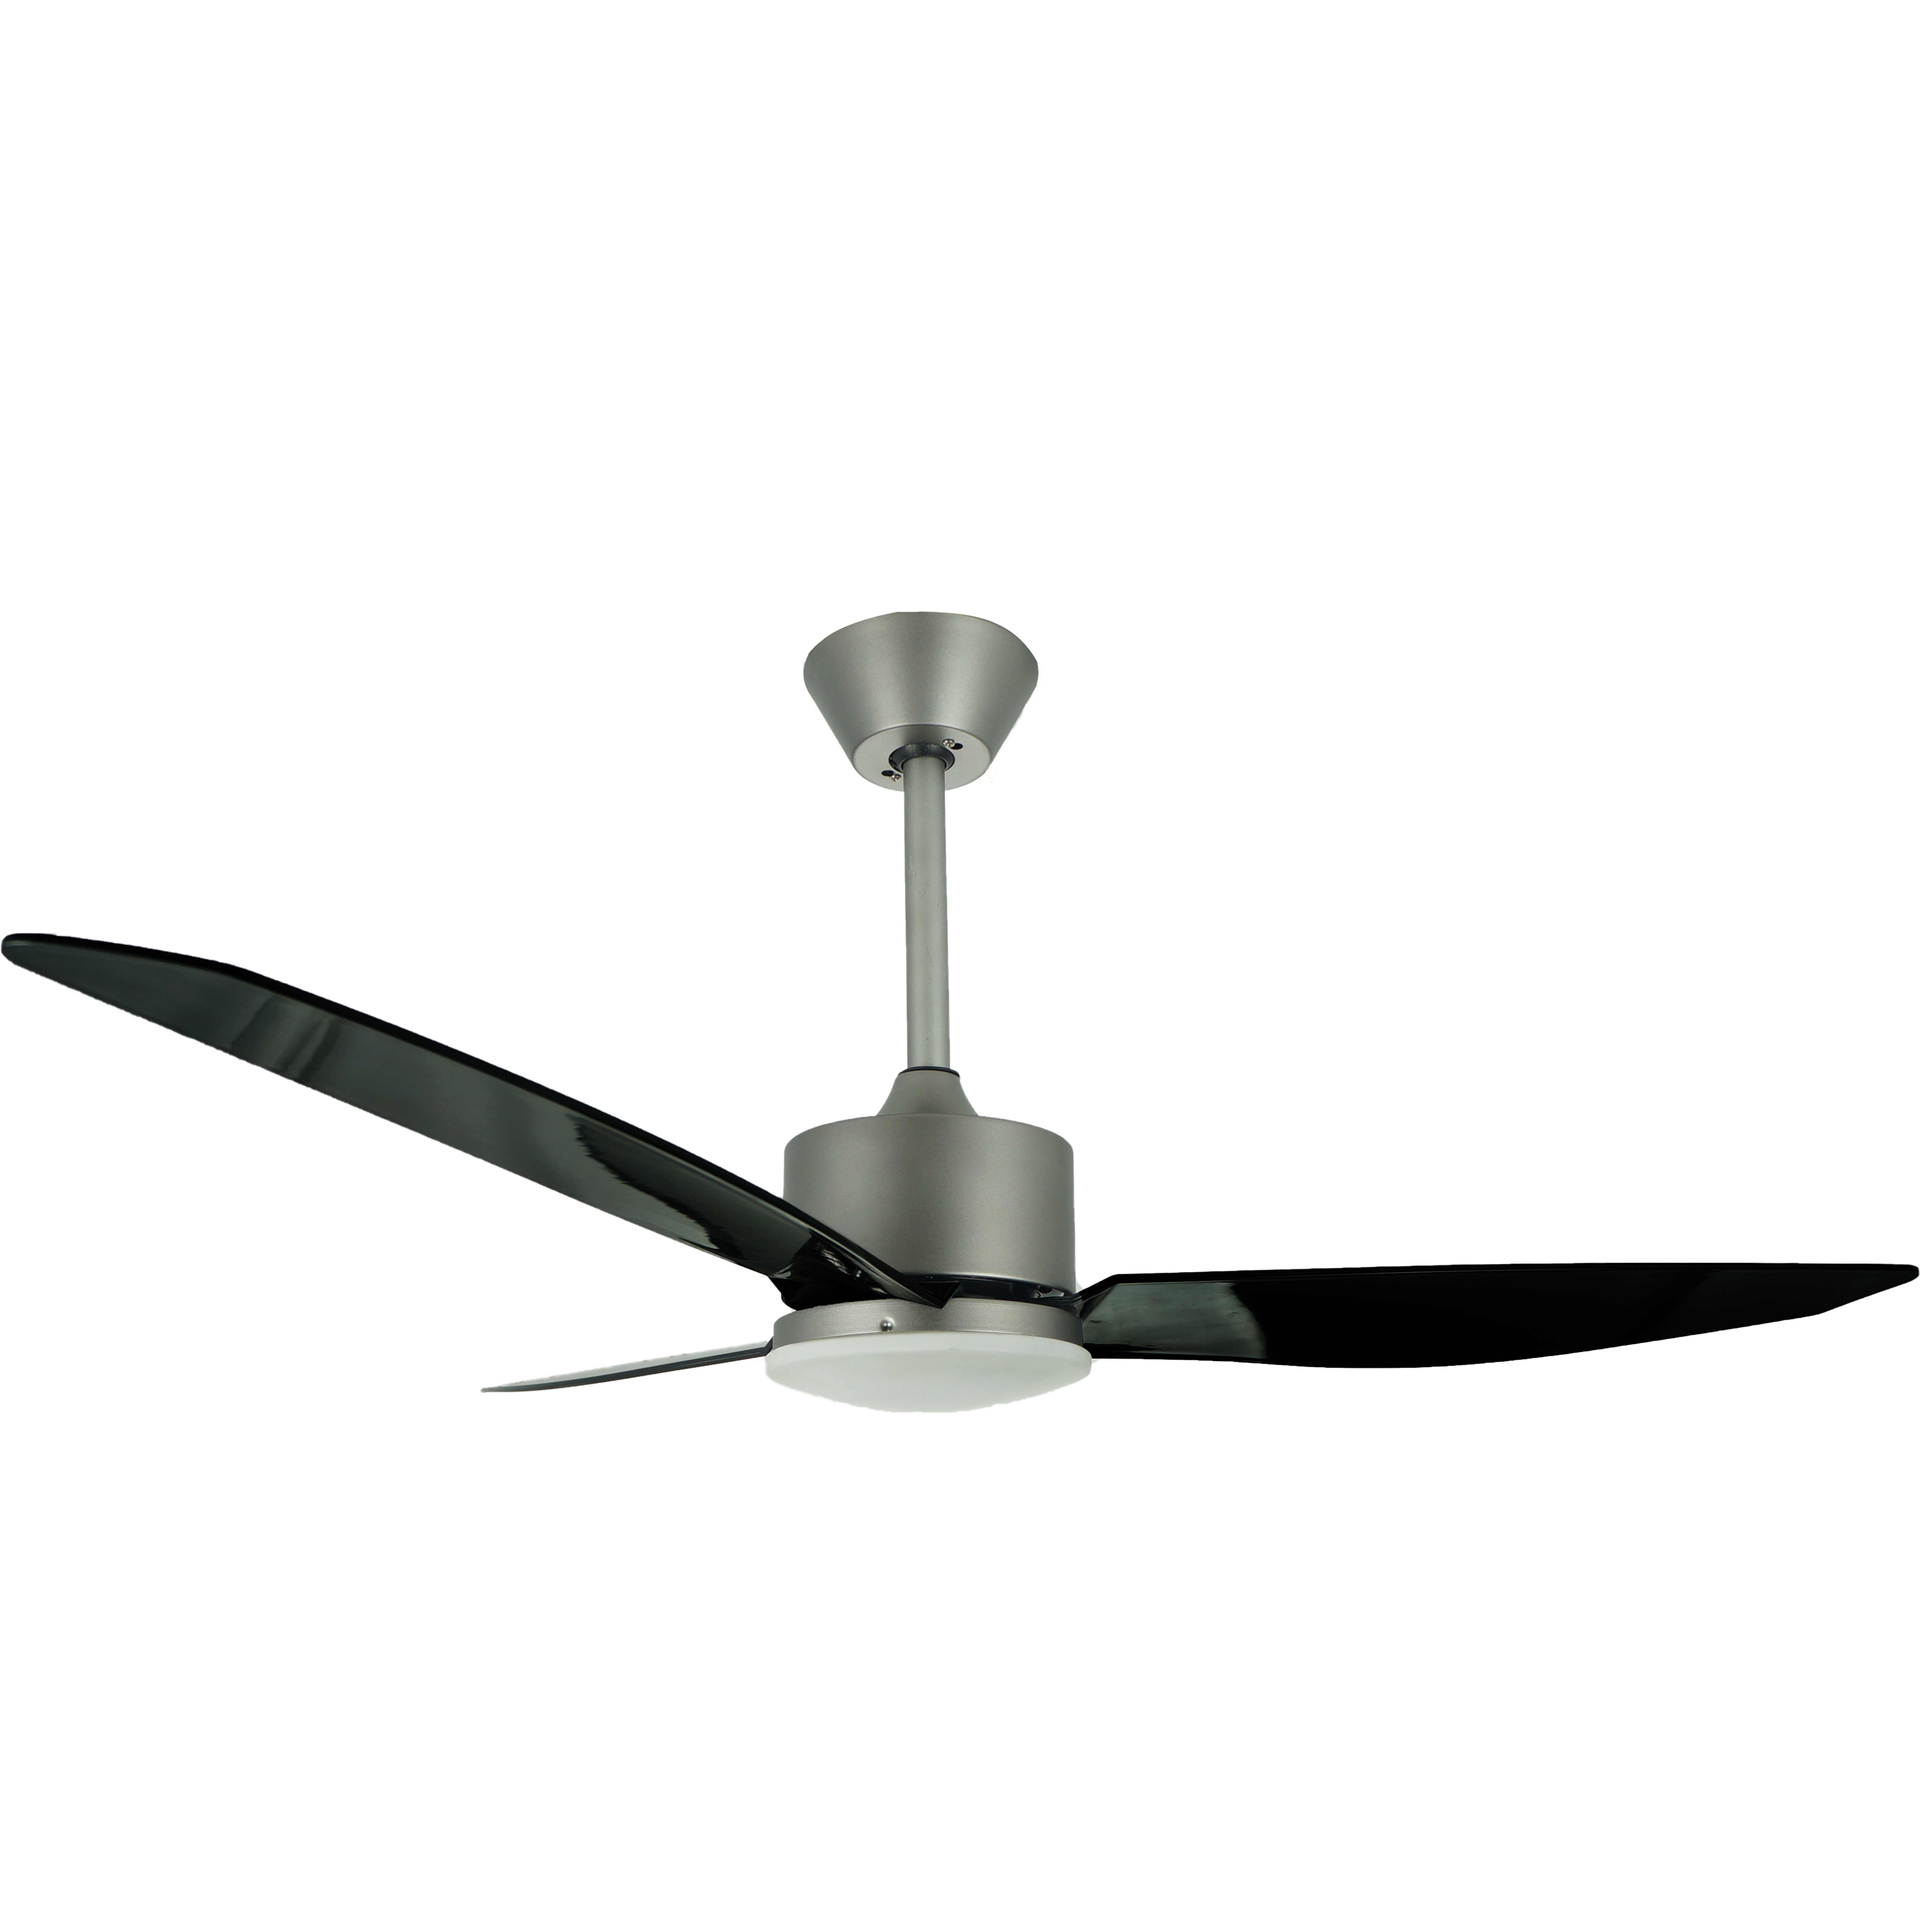 Interior LED Decorative Lighting Black Ceiling Fan with Lamp And Remote Control Ceiling Fan